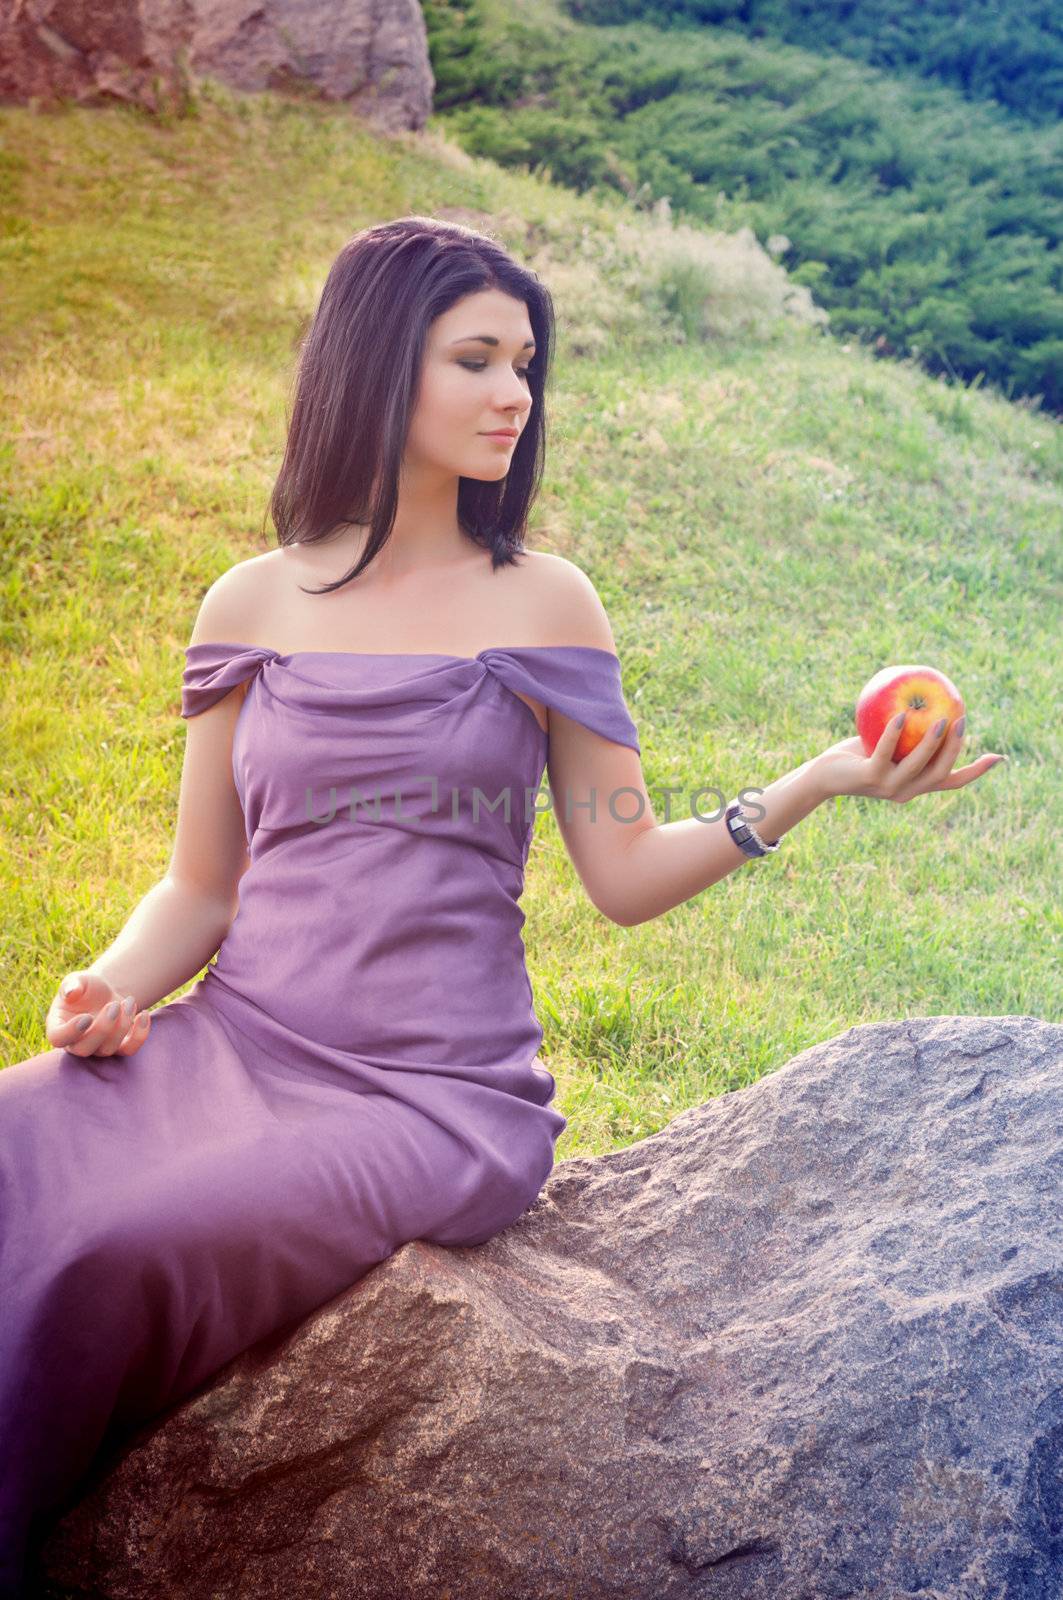 Girl is sitting on rock and looking at apple in his hand that holds.